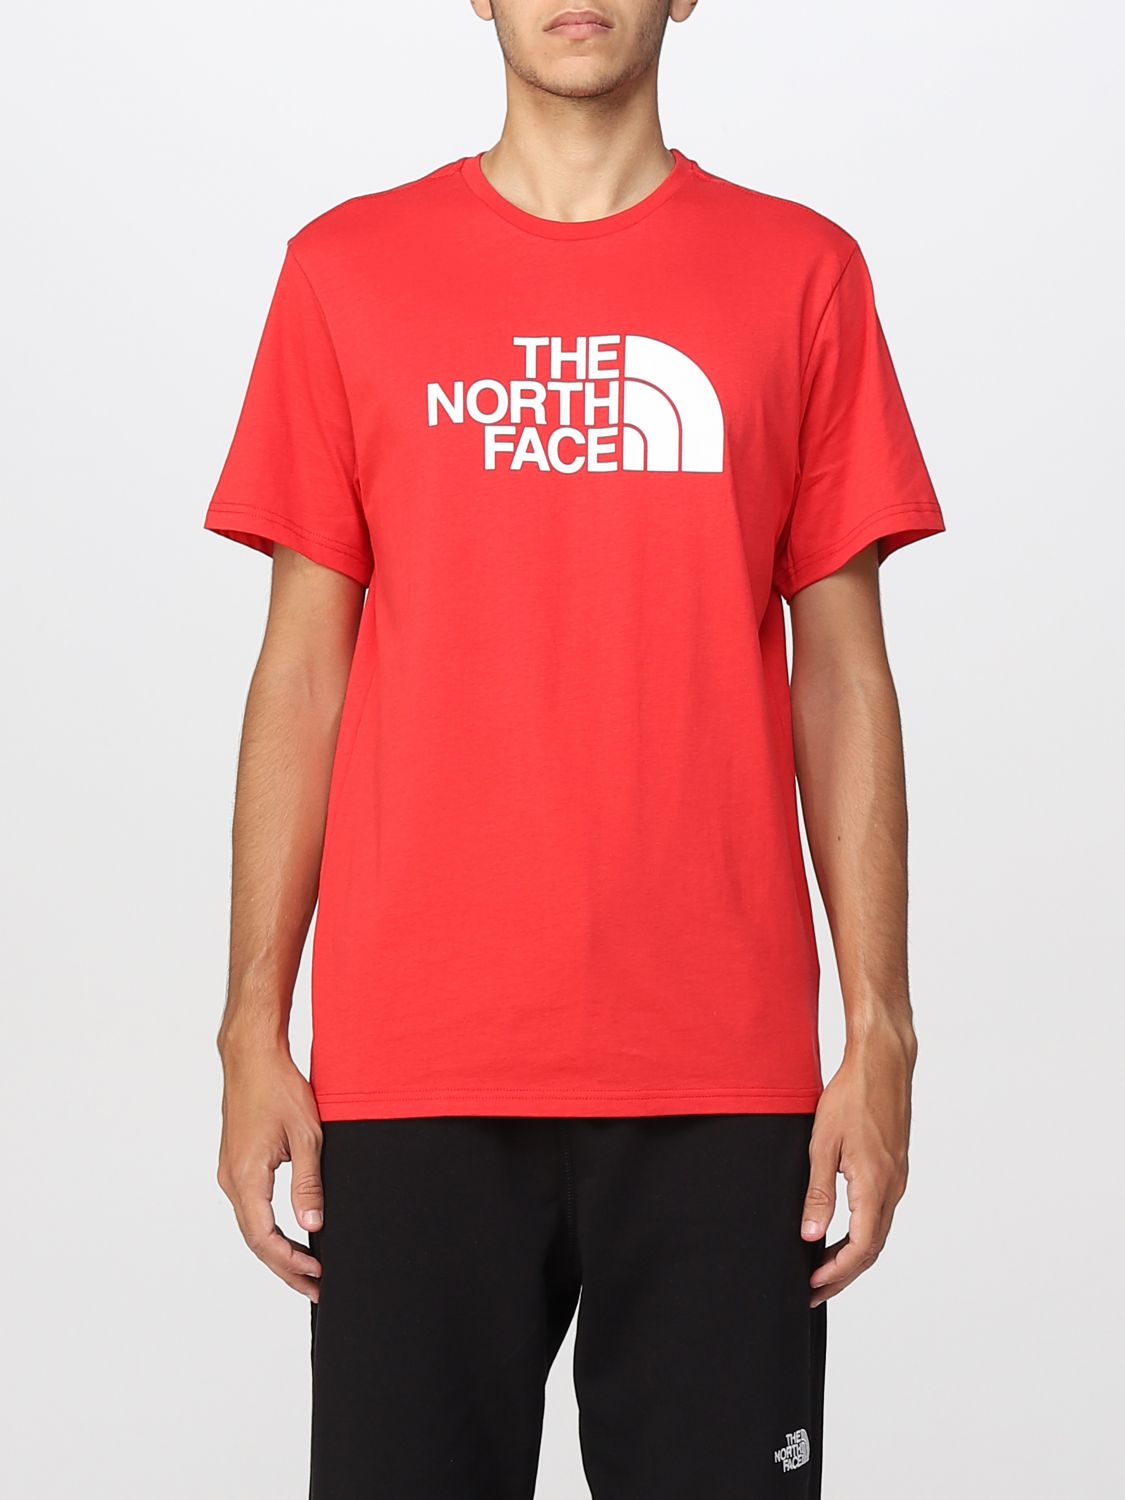 THE NORTH FACE: t-shirt for man - Red | The North Face t-shirt NF0A2TX3 ...